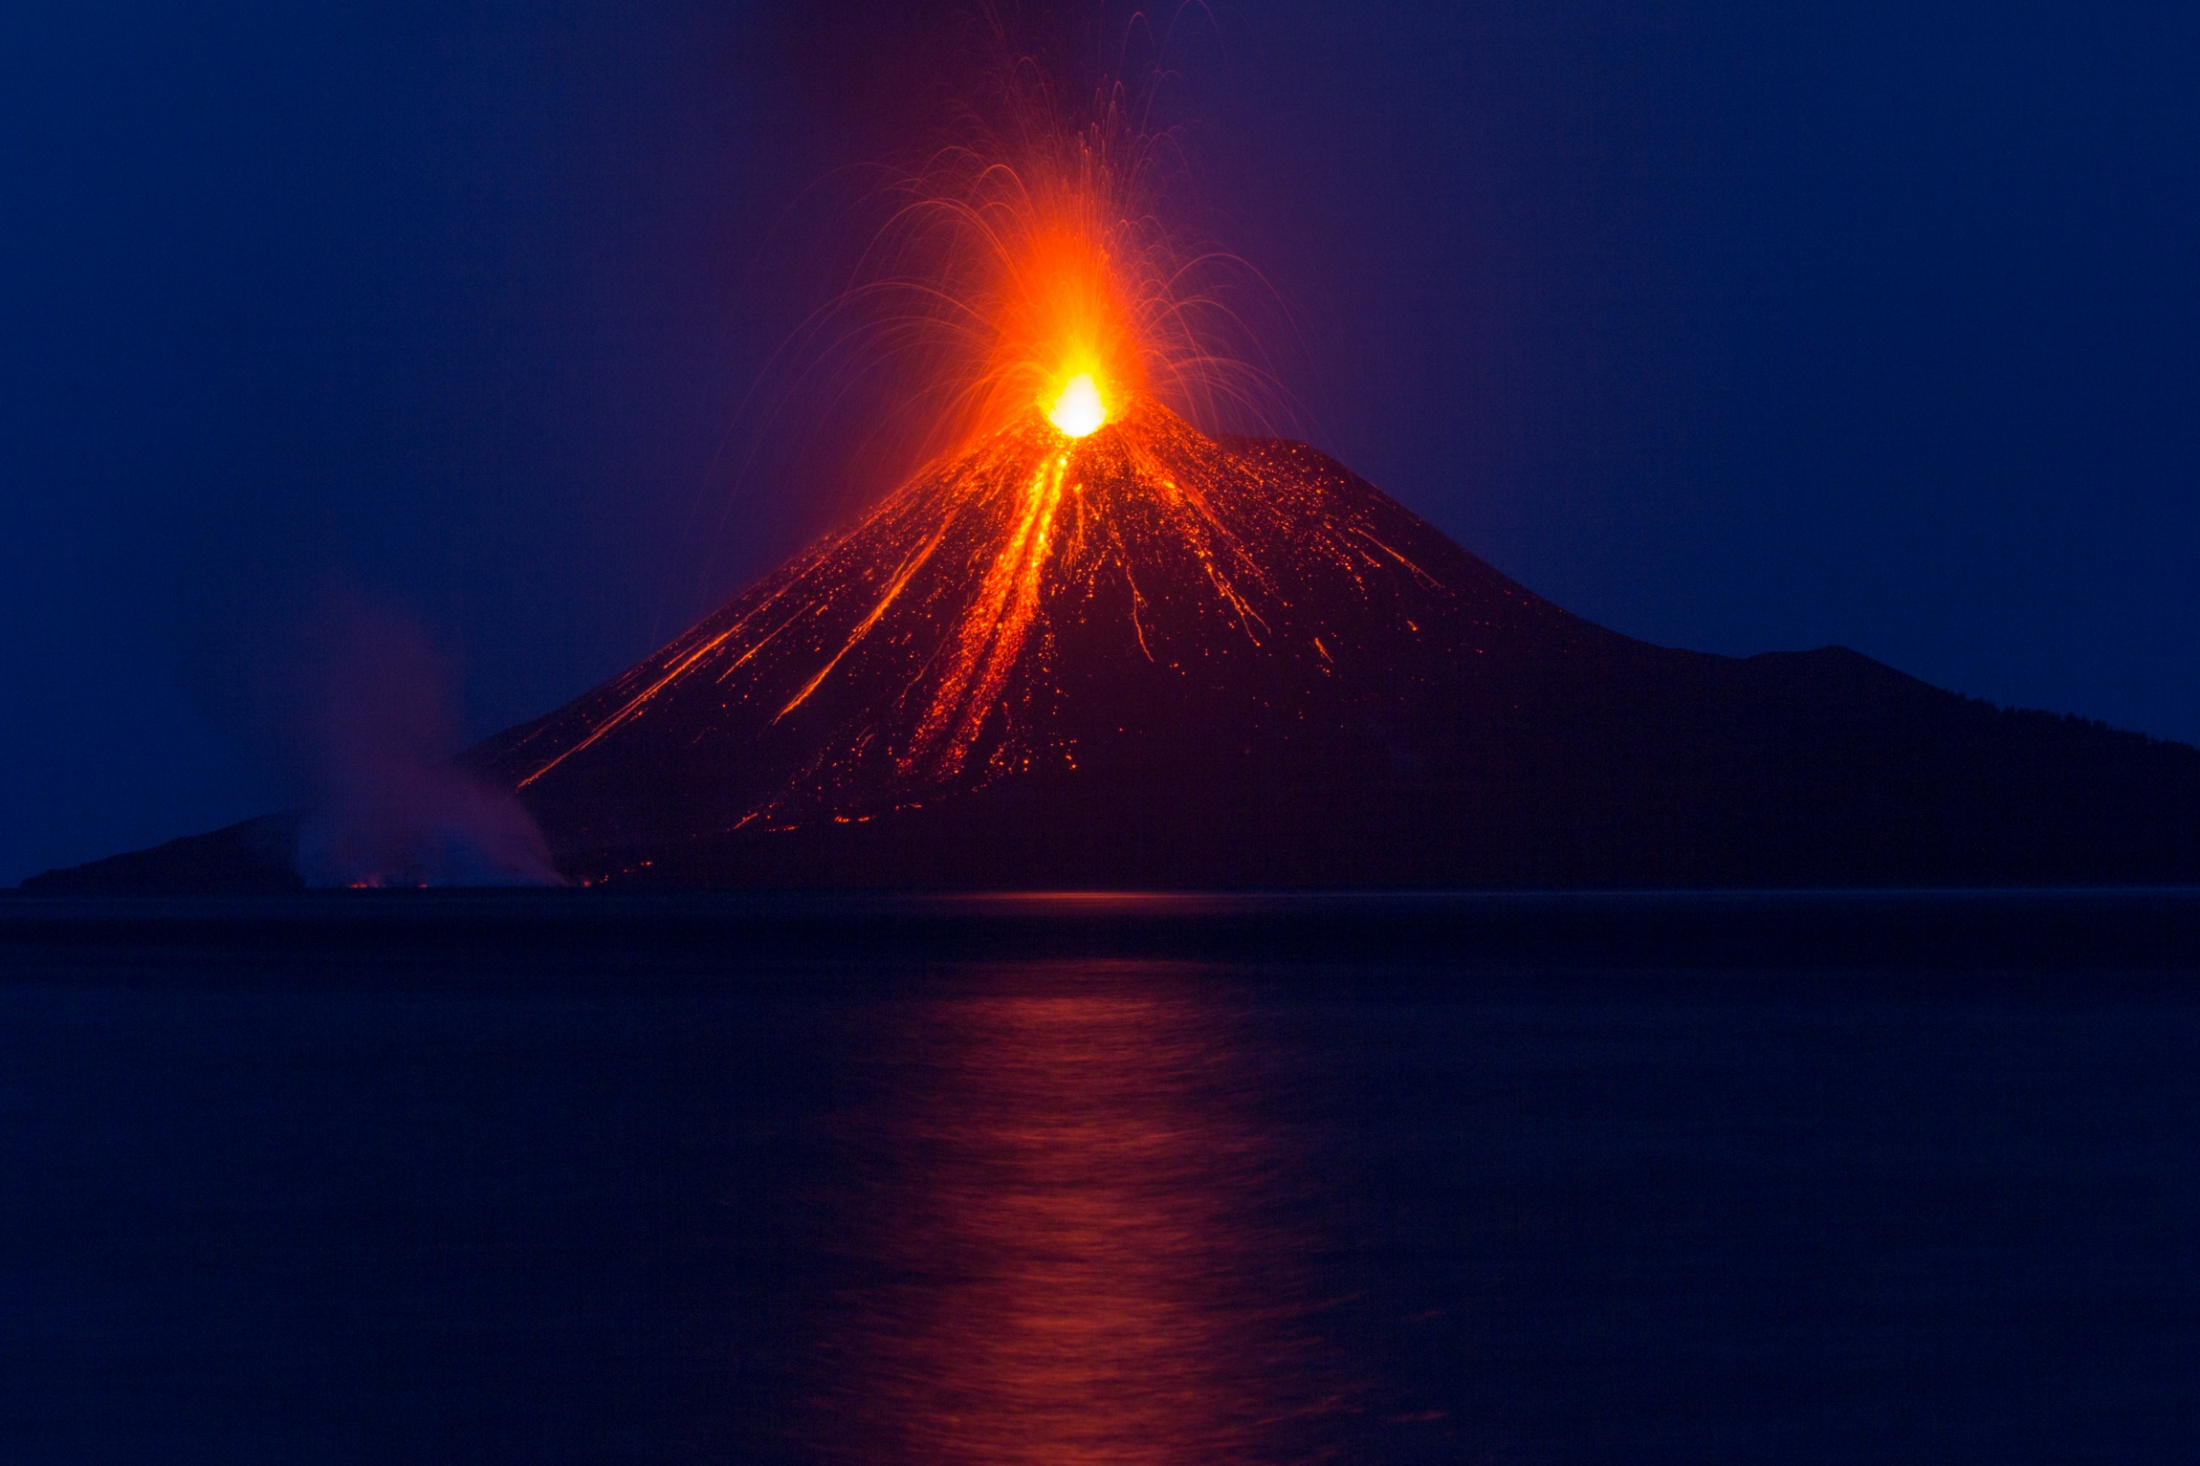 Figure 1: Anak Krakatau at the start of one of its eruptions in August 2018. Slope failure occurred on the southwestern flank, which is left in this image (Source: Dr James D. P. Moore/Earth Observatory of Singapore)